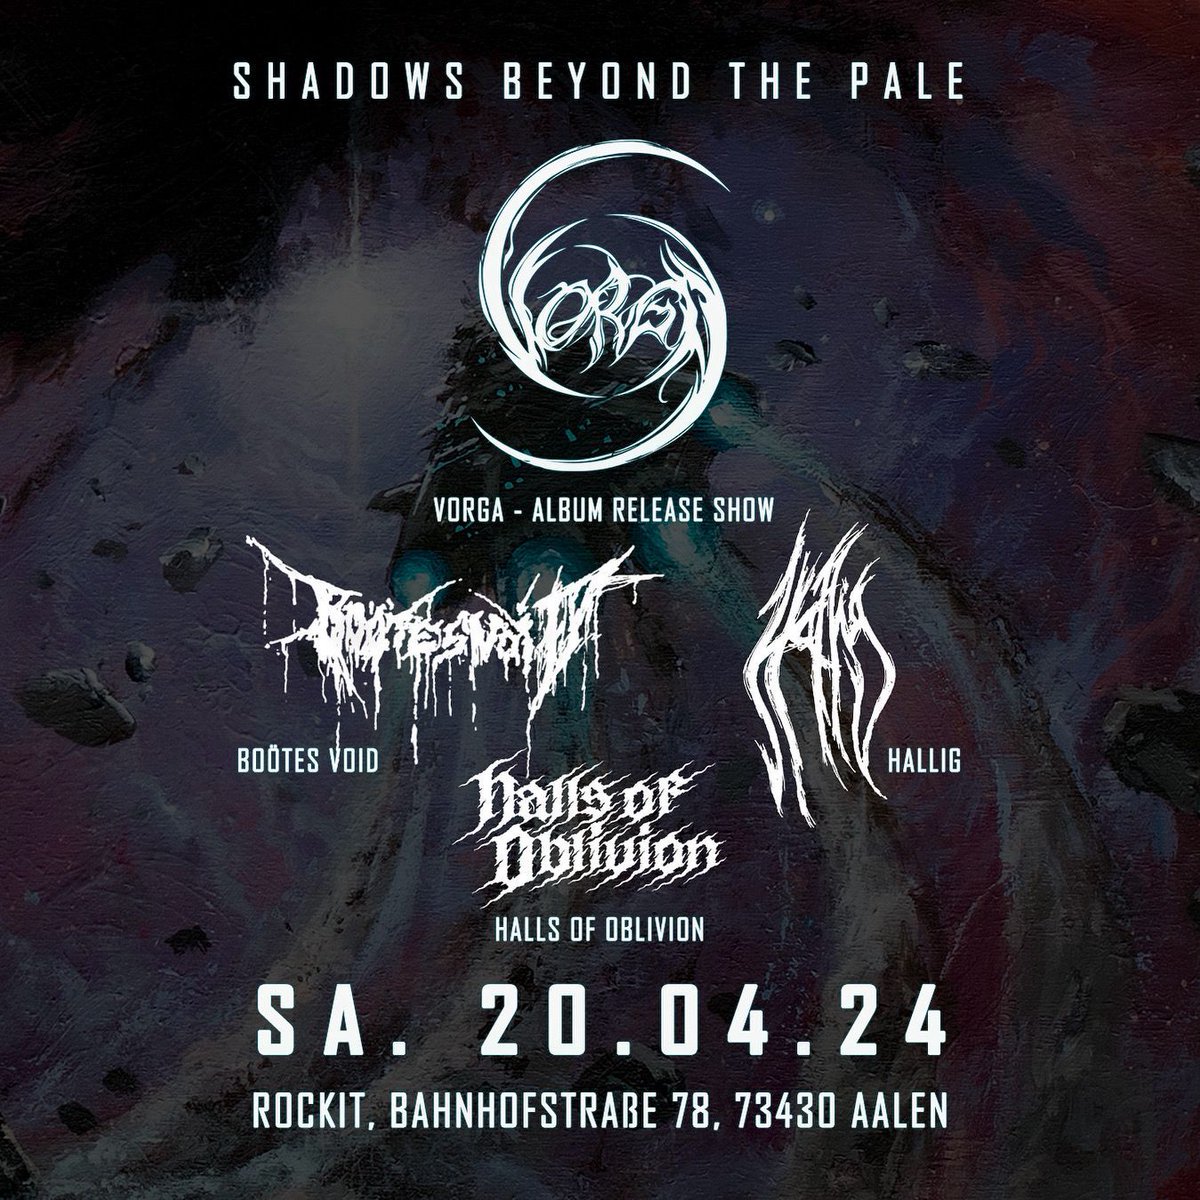 NEW LIVE SHOW ANNOUNCEMENT ❗ ❗ @hallig_official @hallighorde play live at @rockitaalen in 73430 Aalen on the 20th of April and tickets are going fast, so secure yours now 🤘 #talheimrecords #talheimrecordsgermany #live #show #blackmetal #blackmetallive #albumrelease